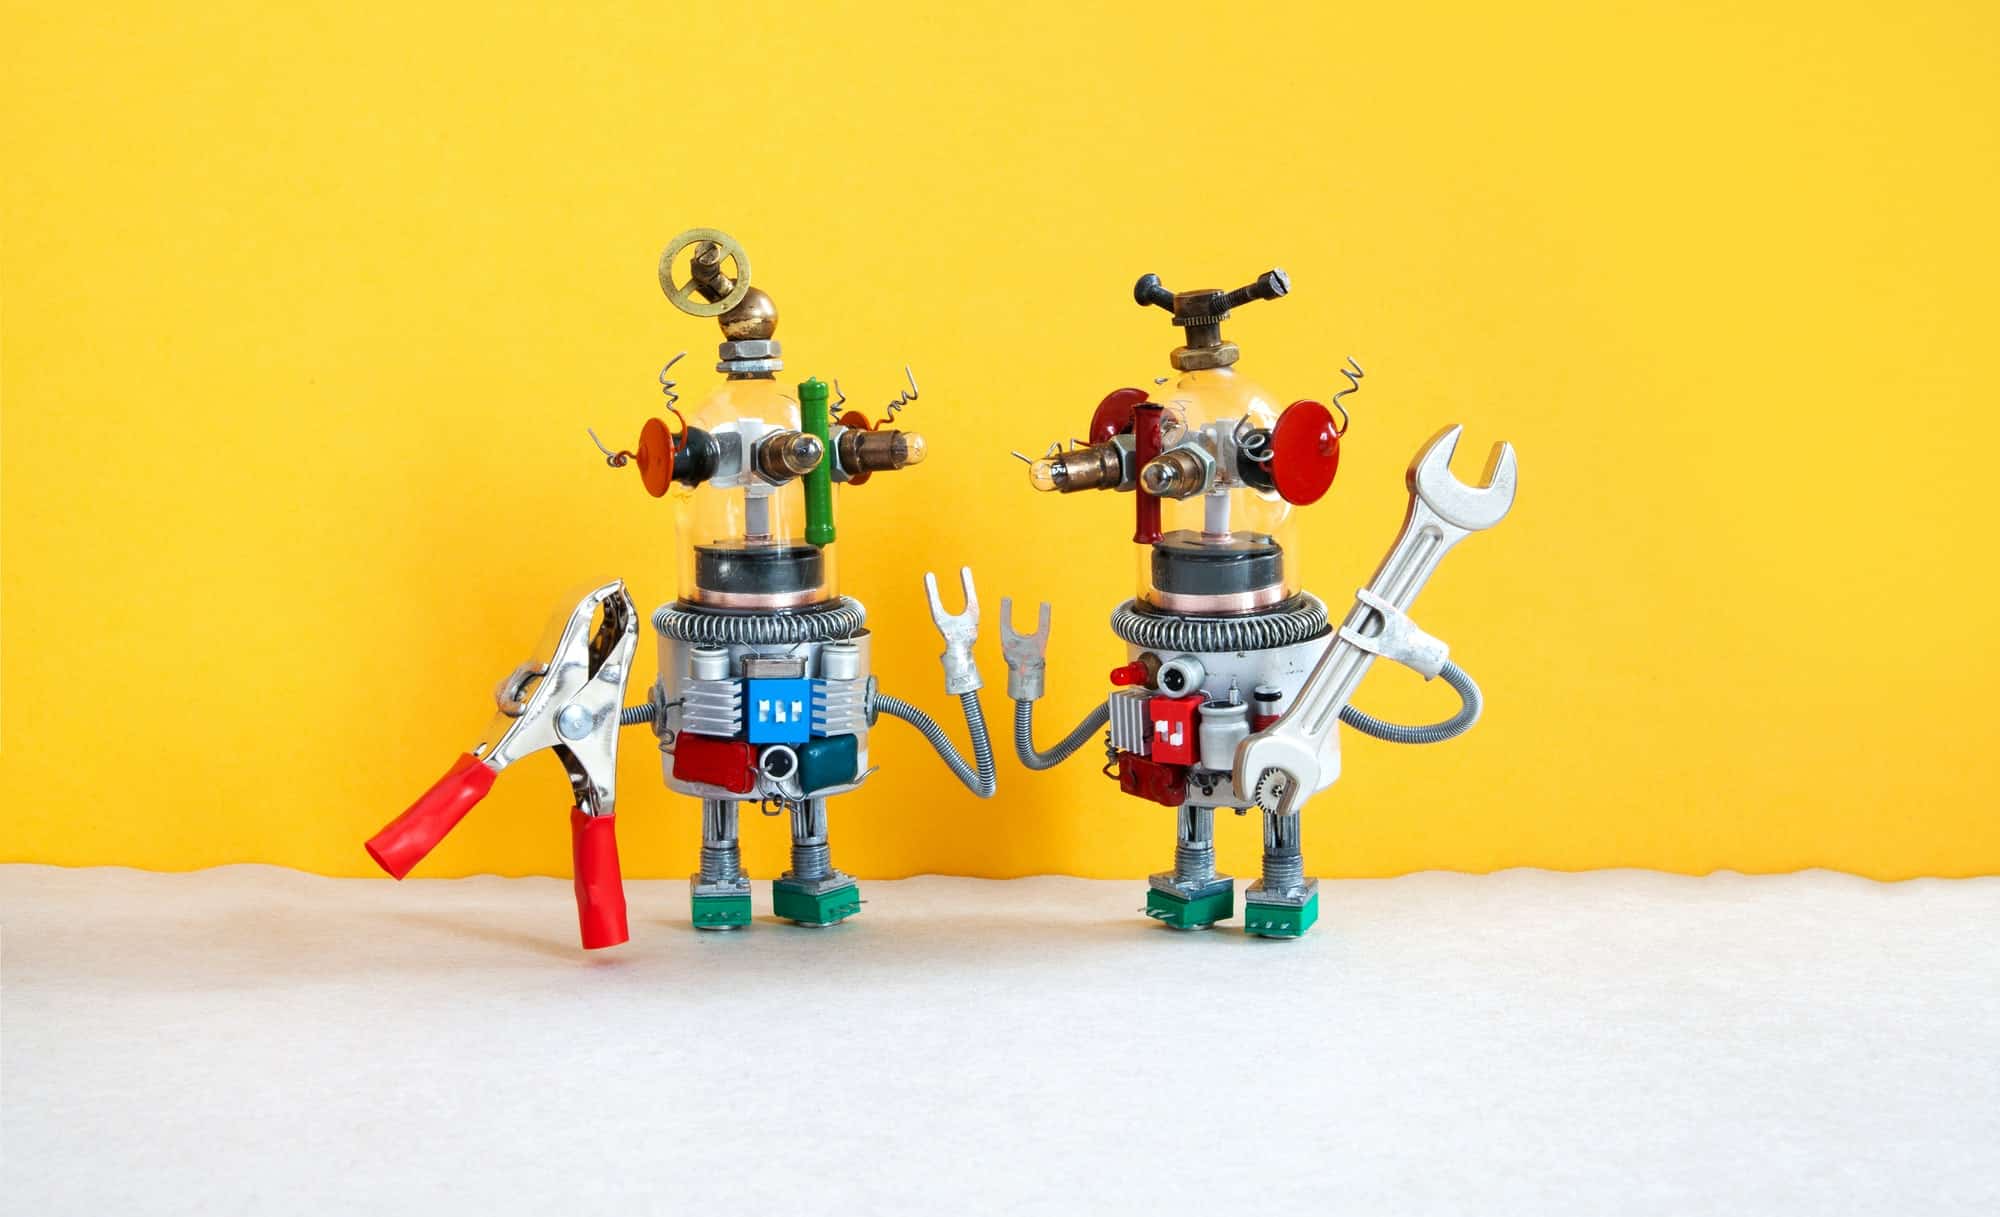 Two comical electrician robots are ready for maintenance.